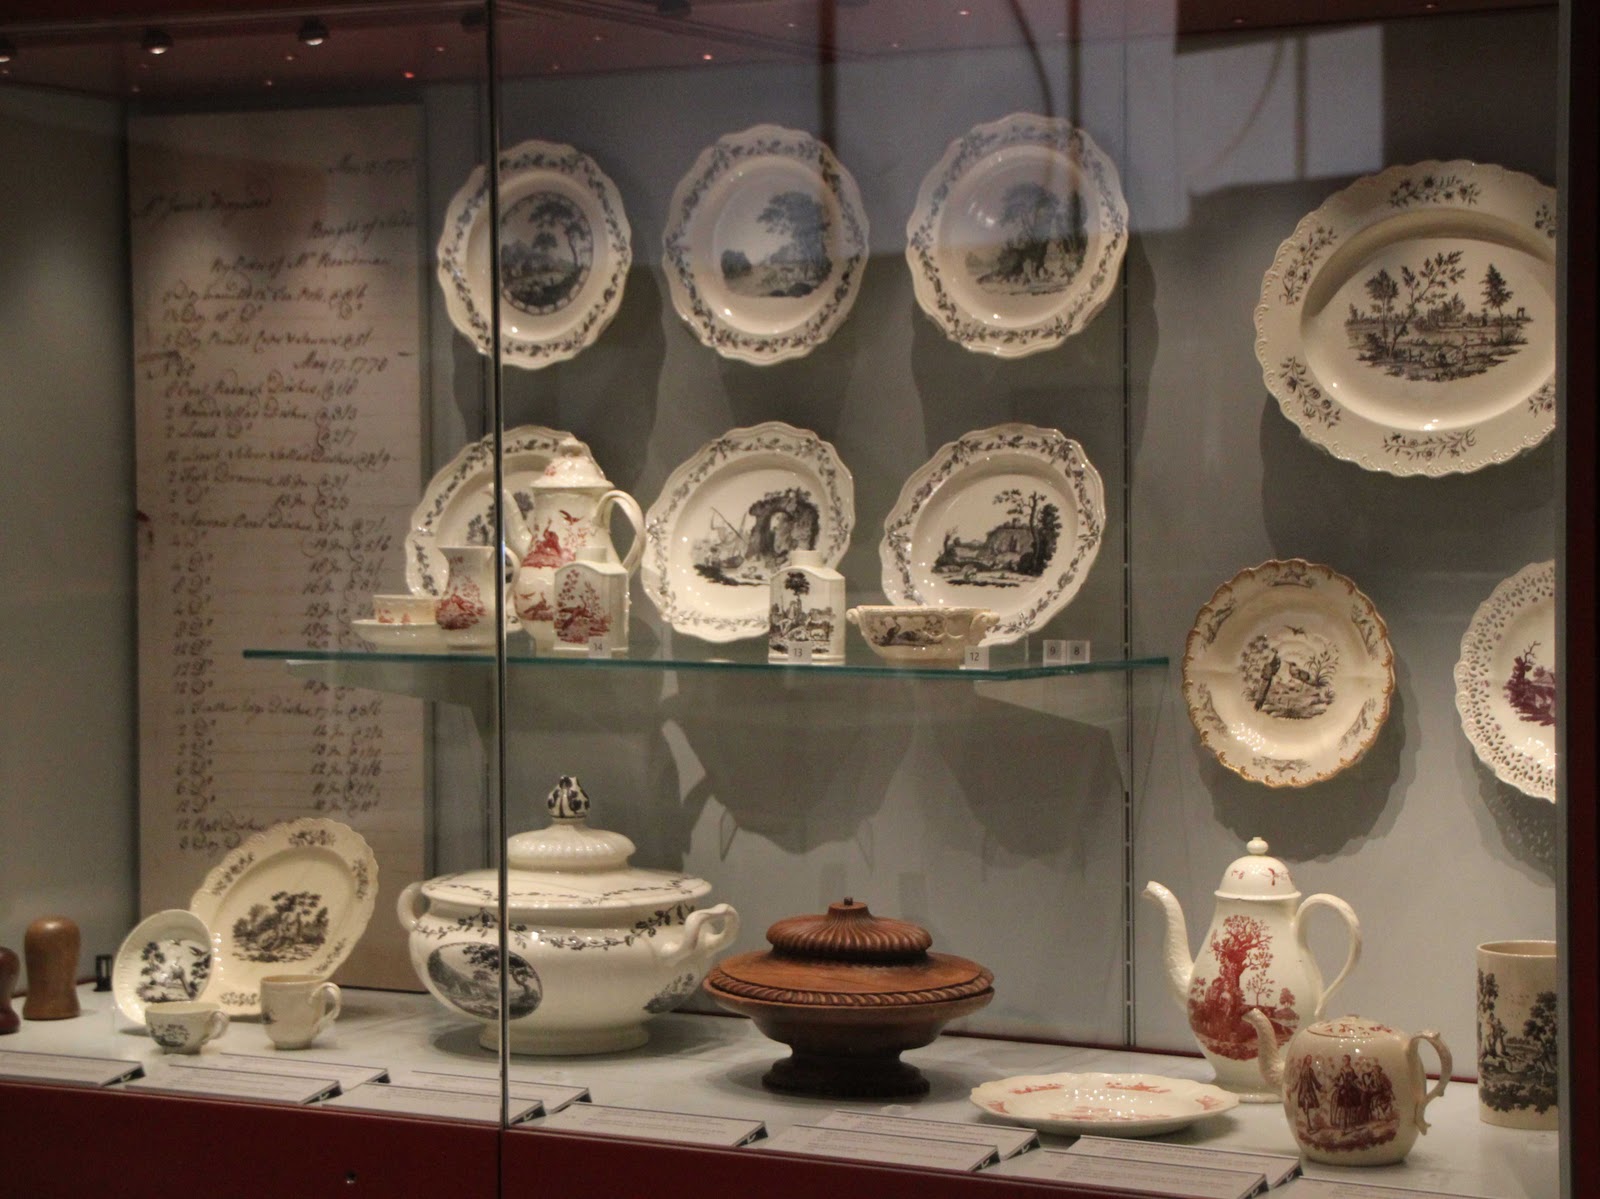 Anna's Ceramics by Anna Ryland: Wedgwood Museum in trouble